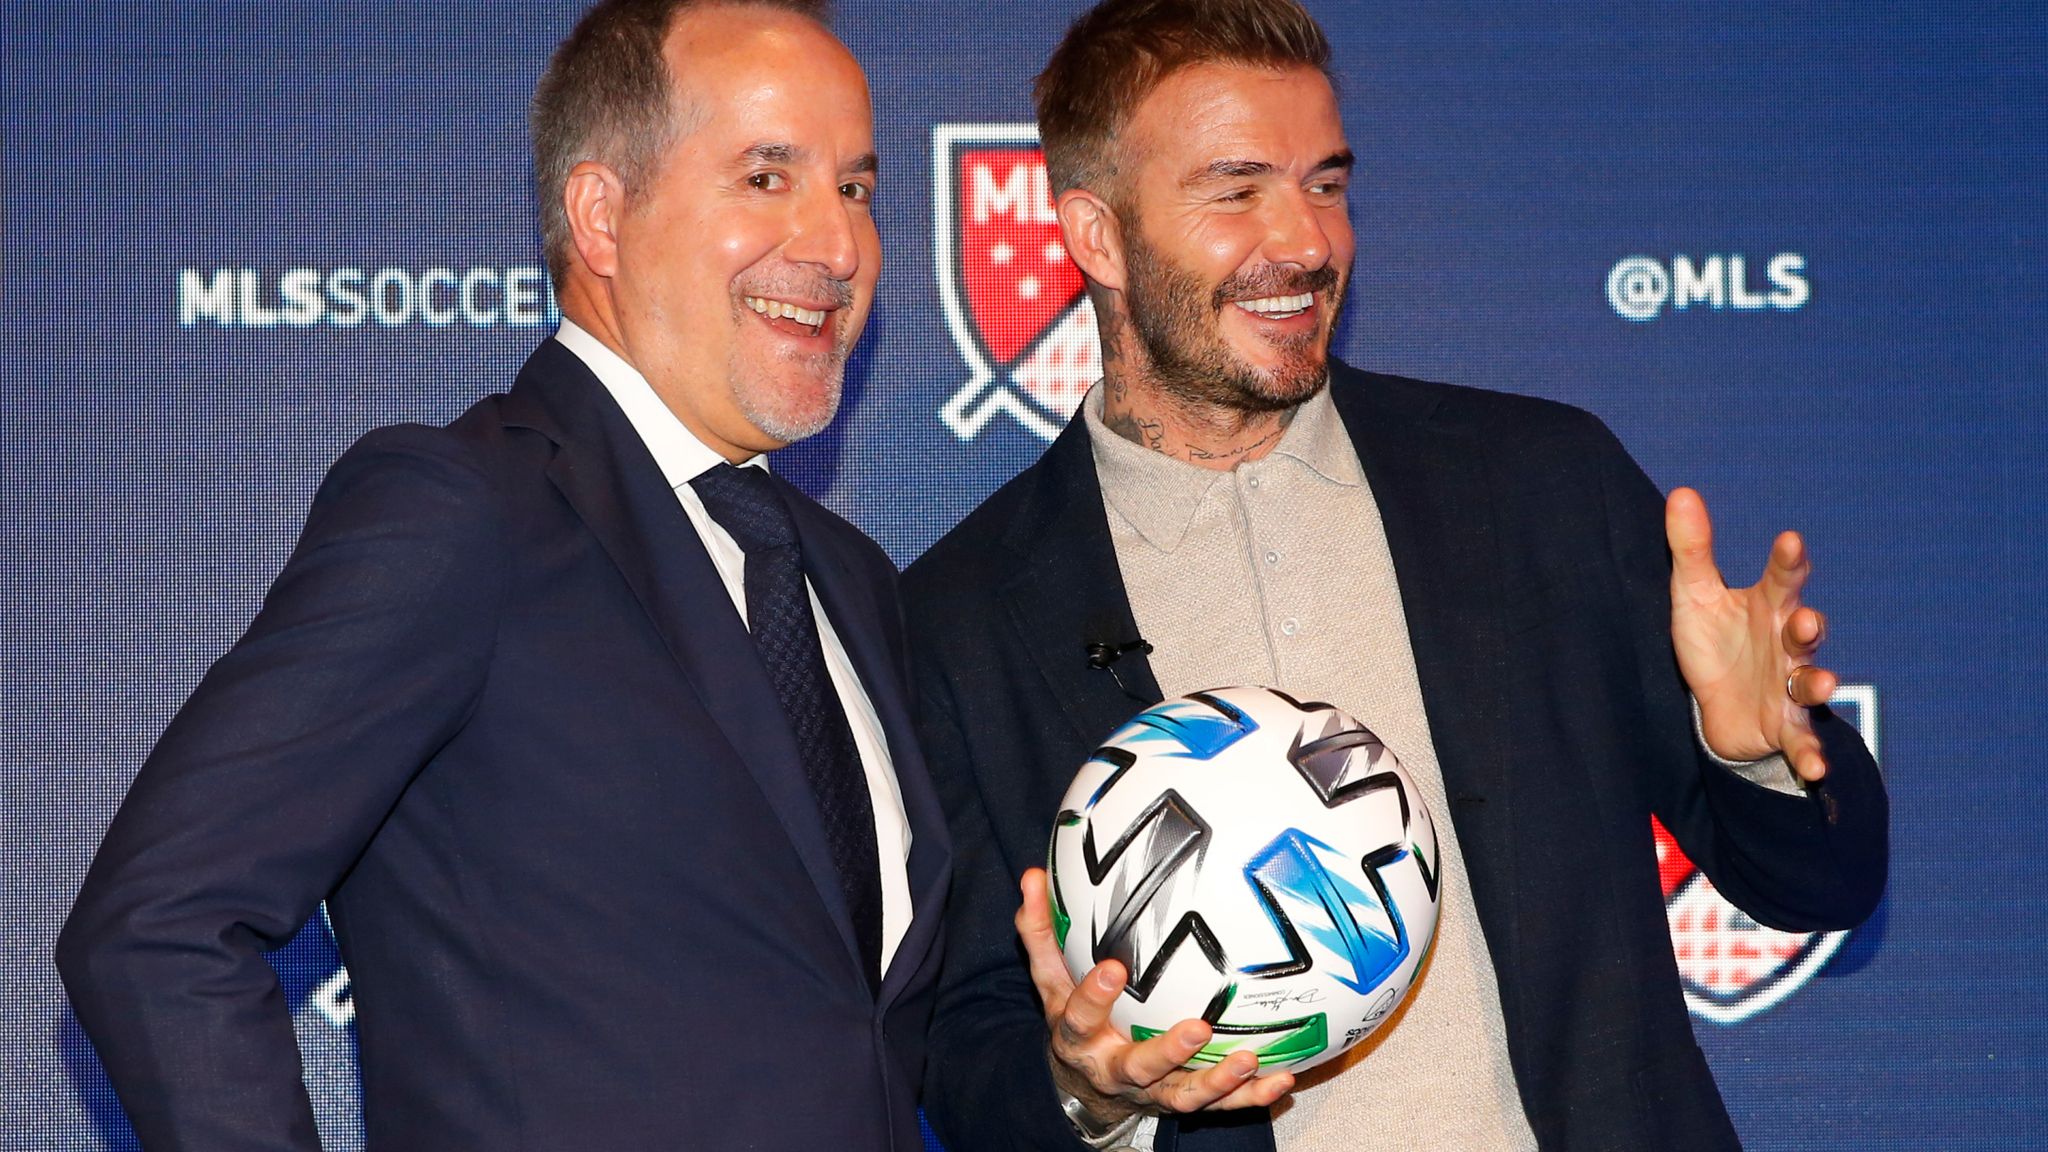 David Beckham given green light for land purchase to set up MLS